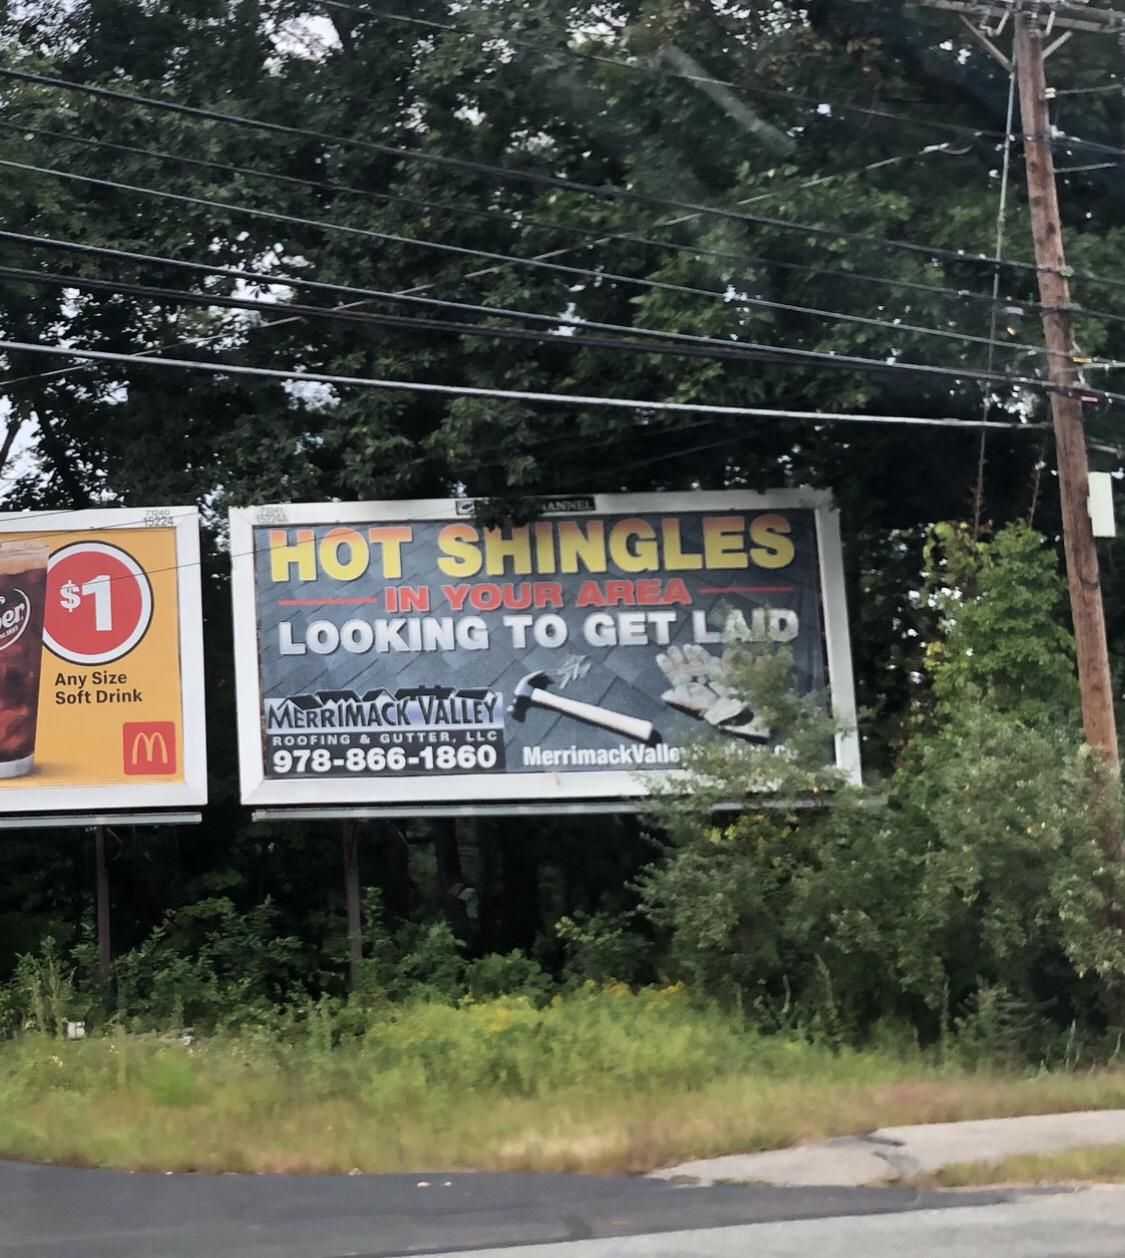 HOT SHINGLES IN YOUR AREA LOOKING TO GET LAID!